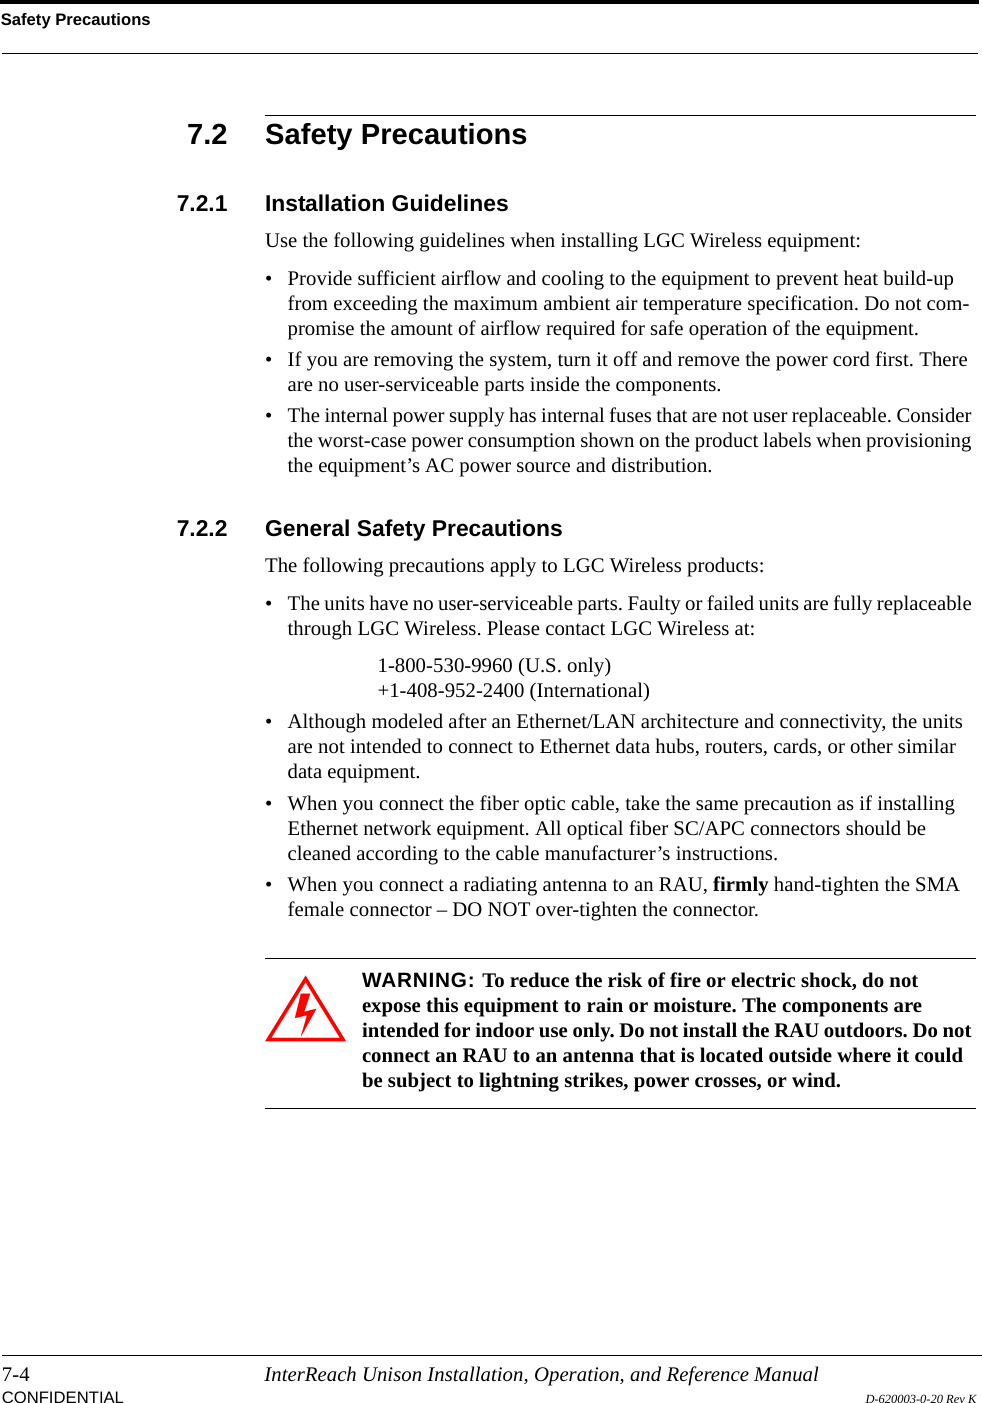 Safety Precautions7-4 InterReach Unison Installation, Operation, and Reference ManualCONFIDENTIAL D-620003-0-20 Rev K7.2 Safety Precautions7.2.1 Installation GuidelinesUse the following guidelines when installing LGC Wireless equipment:• Provide sufficient airflow and cooling to the equipment to prevent heat build-up from exceeding the maximum ambient air temperature specification. Do not com-promise the amount of airflow required for safe operation of the equipment.• If you are removing the system, turn it off and remove the power cord first. There are no user-serviceable parts inside the components.• The internal power supply has internal fuses that are not user replaceable. Consider the worst-case power consumption shown on the product labels when provisioning the equipment’s AC power source and distribution.7.2.2 General Safety PrecautionsThe following precautions apply to LGC Wireless products:• The units have no user-serviceable parts. Faulty or failed units are fully replaceable through LGC Wireless. Please contact LGC Wireless at:1-800-530-9960 (U.S. only)+1-408-952-2400 (International)• Although modeled after an Ethernet/LAN architecture and connectivity, the units are not intended to connect to Ethernet data hubs, routers, cards, or other similar data equipment.• When you connect the fiber optic cable, take the same precaution as if installing Ethernet network equipment. All optical fiber SC/APC connectors should be cleaned according to the cable manufacturer’s instructions.• When you connect a radiating antenna to an RAU, firmly hand-tighten the SMA female connector – DO NOT over-tighten the connector.WARNING: To reduce the risk of fire or electric shock, do not expose this equipment to rain or moisture. The components are intended for indoor use only. Do not install the RAU outdoors. Do not connect an RAU to an antenna that is located outside where it could be subject to lightning strikes, power crosses, or wind.